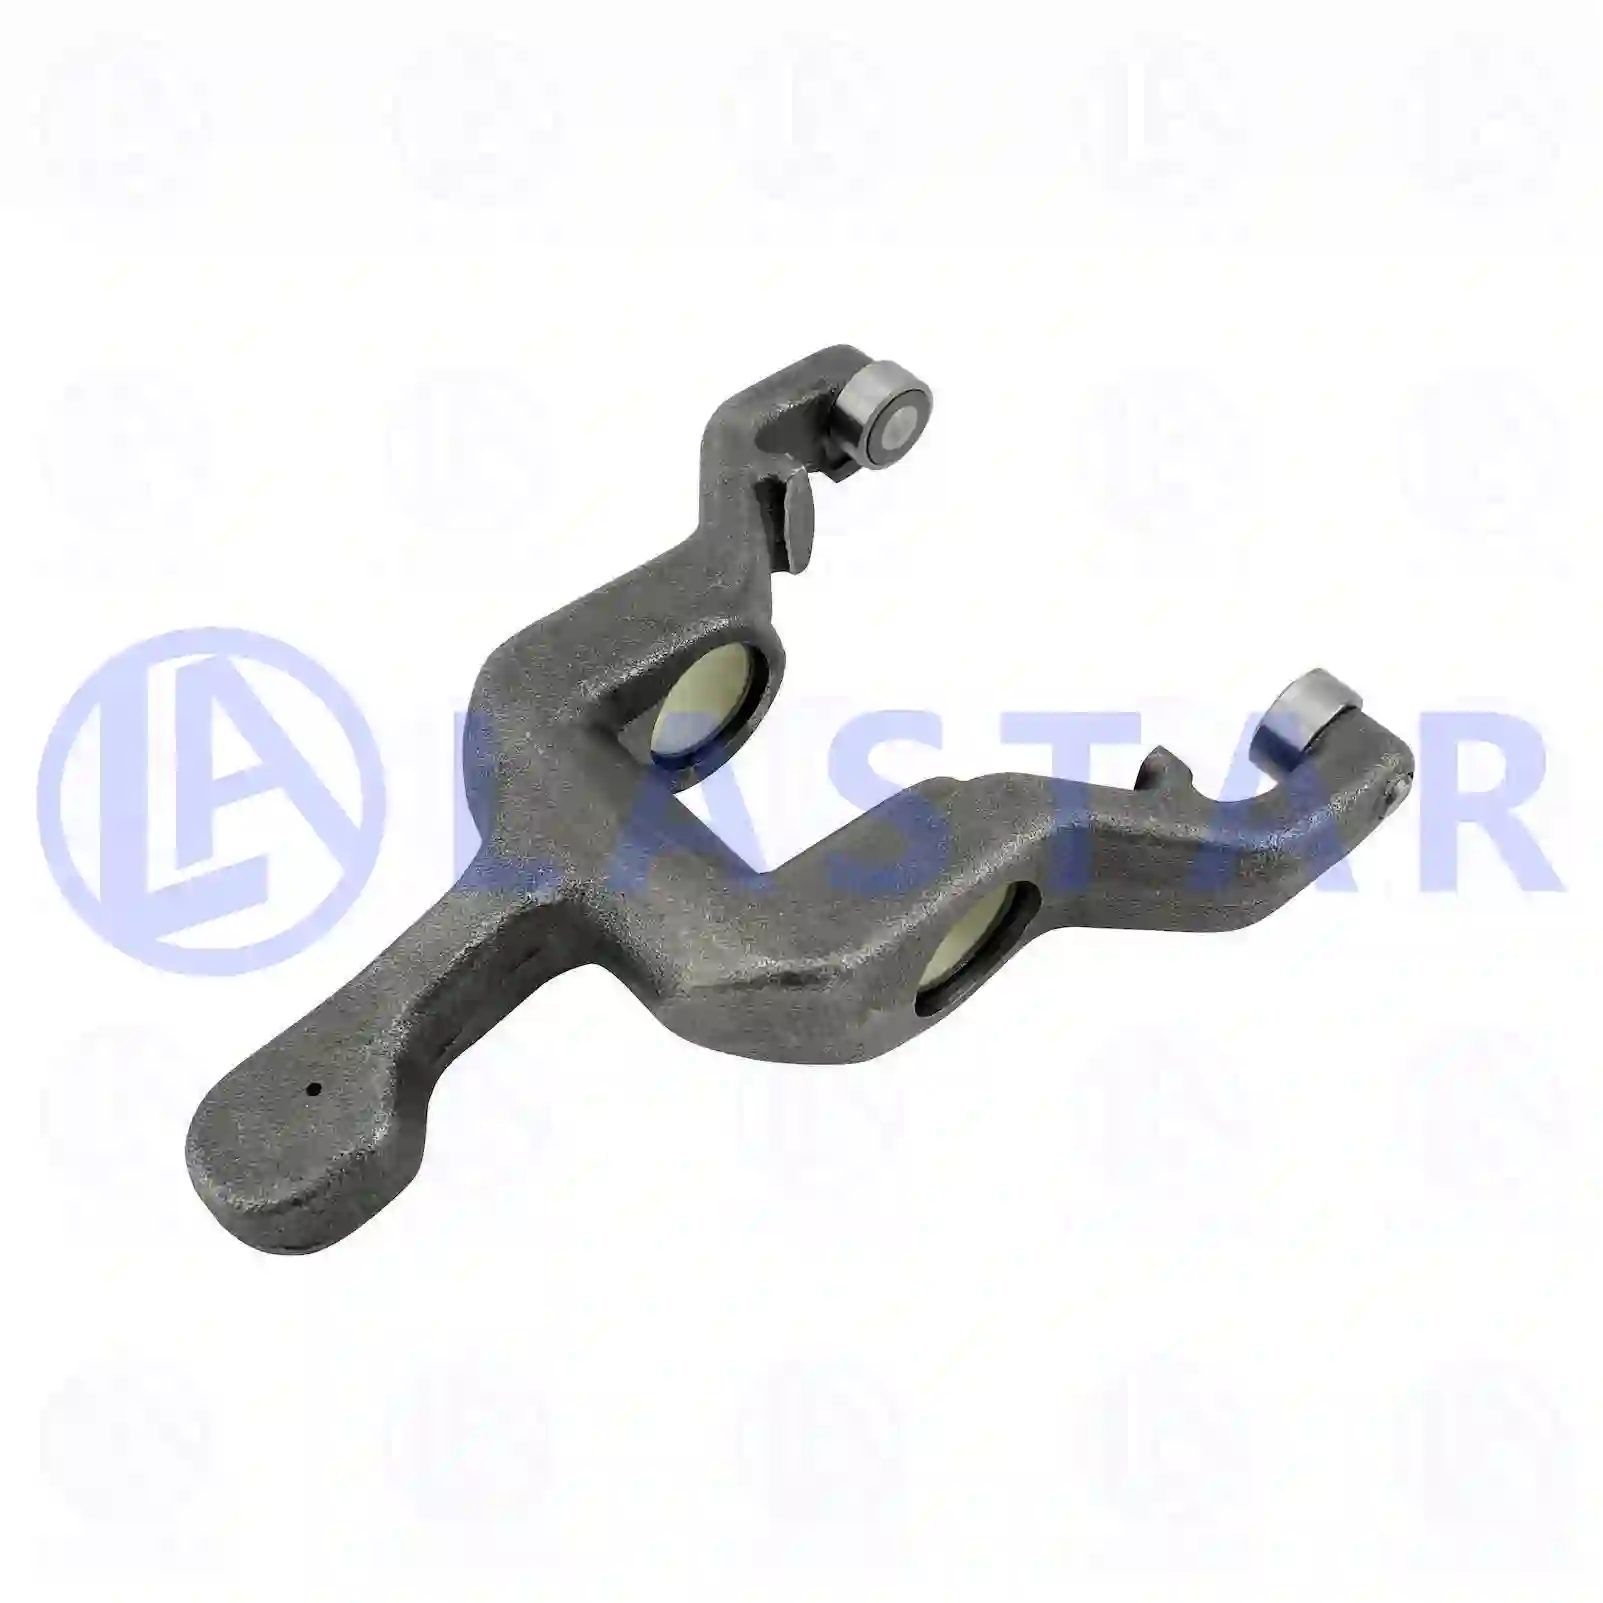 Release fork, 77722400, 6502500013, 6502501313, 6502503113, 6502503813 ||  77722400 Lastar Spare Part | Truck Spare Parts, Auotomotive Spare Parts Release fork, 77722400, 6502500013, 6502501313, 6502503113, 6502503813 ||  77722400 Lastar Spare Part | Truck Spare Parts, Auotomotive Spare Parts